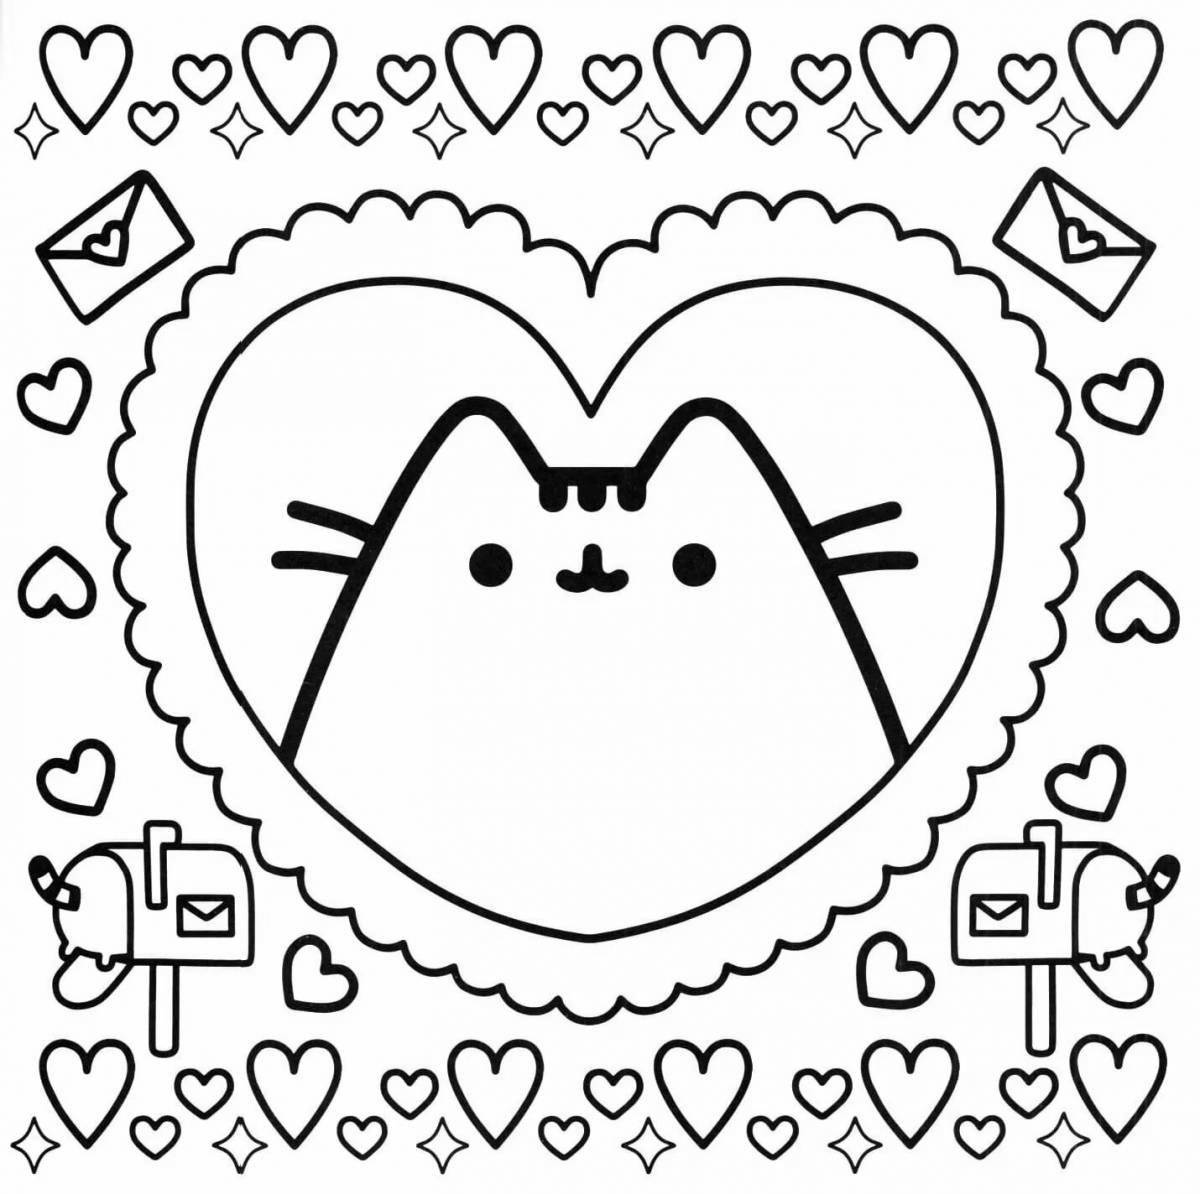 Pusheen's Glorious Christmas Coloring Page